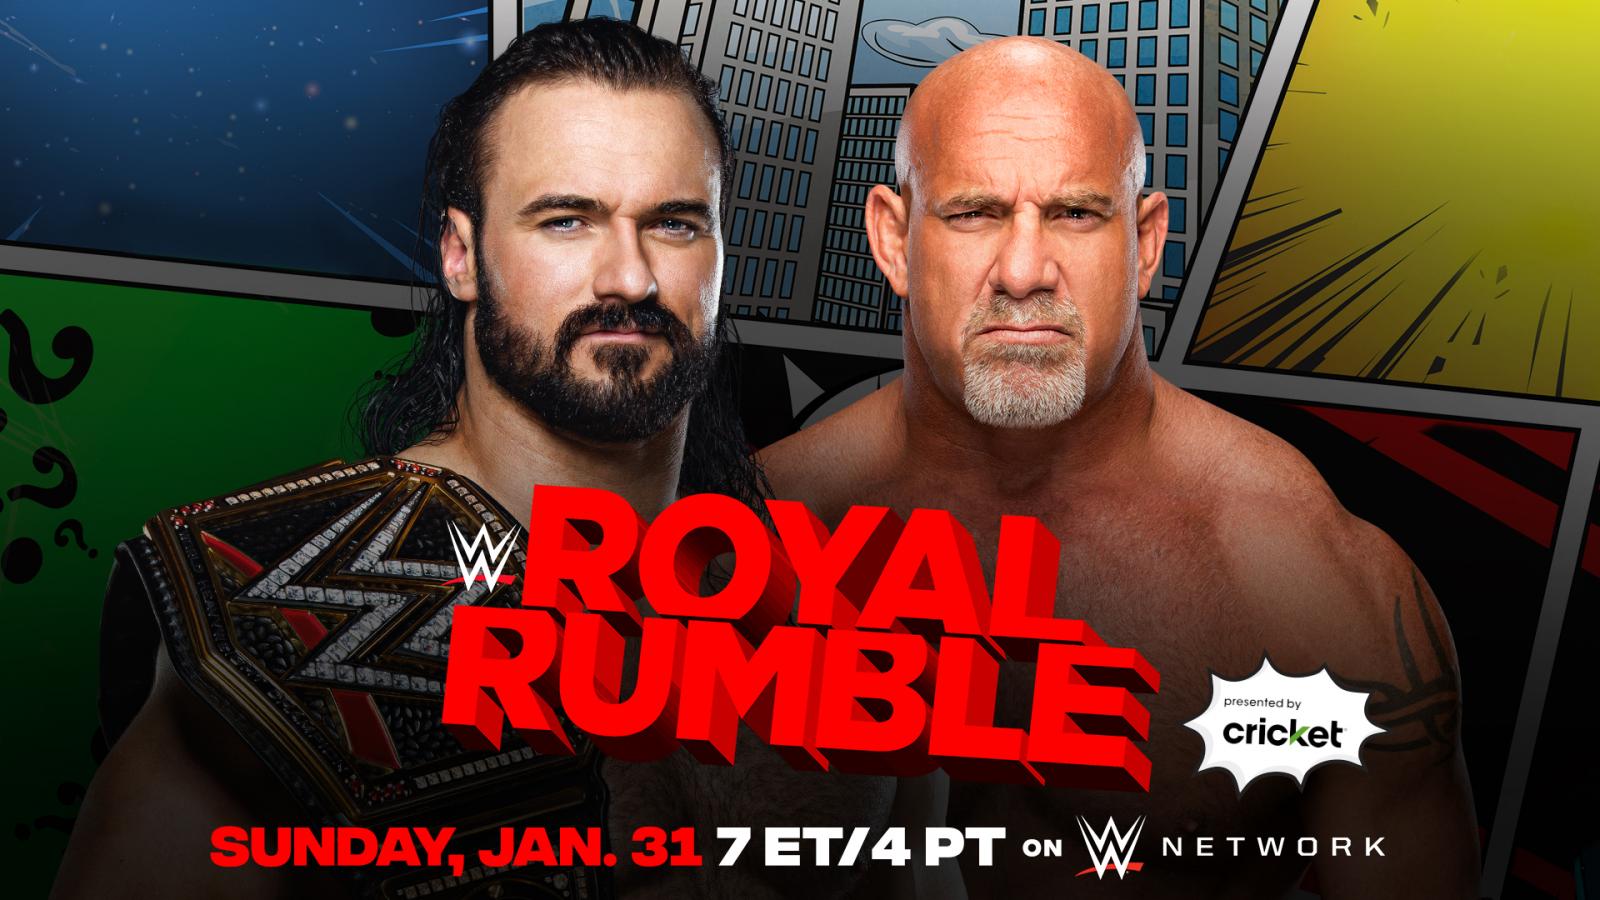 WWE Royal Rumble 2021 Start Time, Card and How to Watch Online